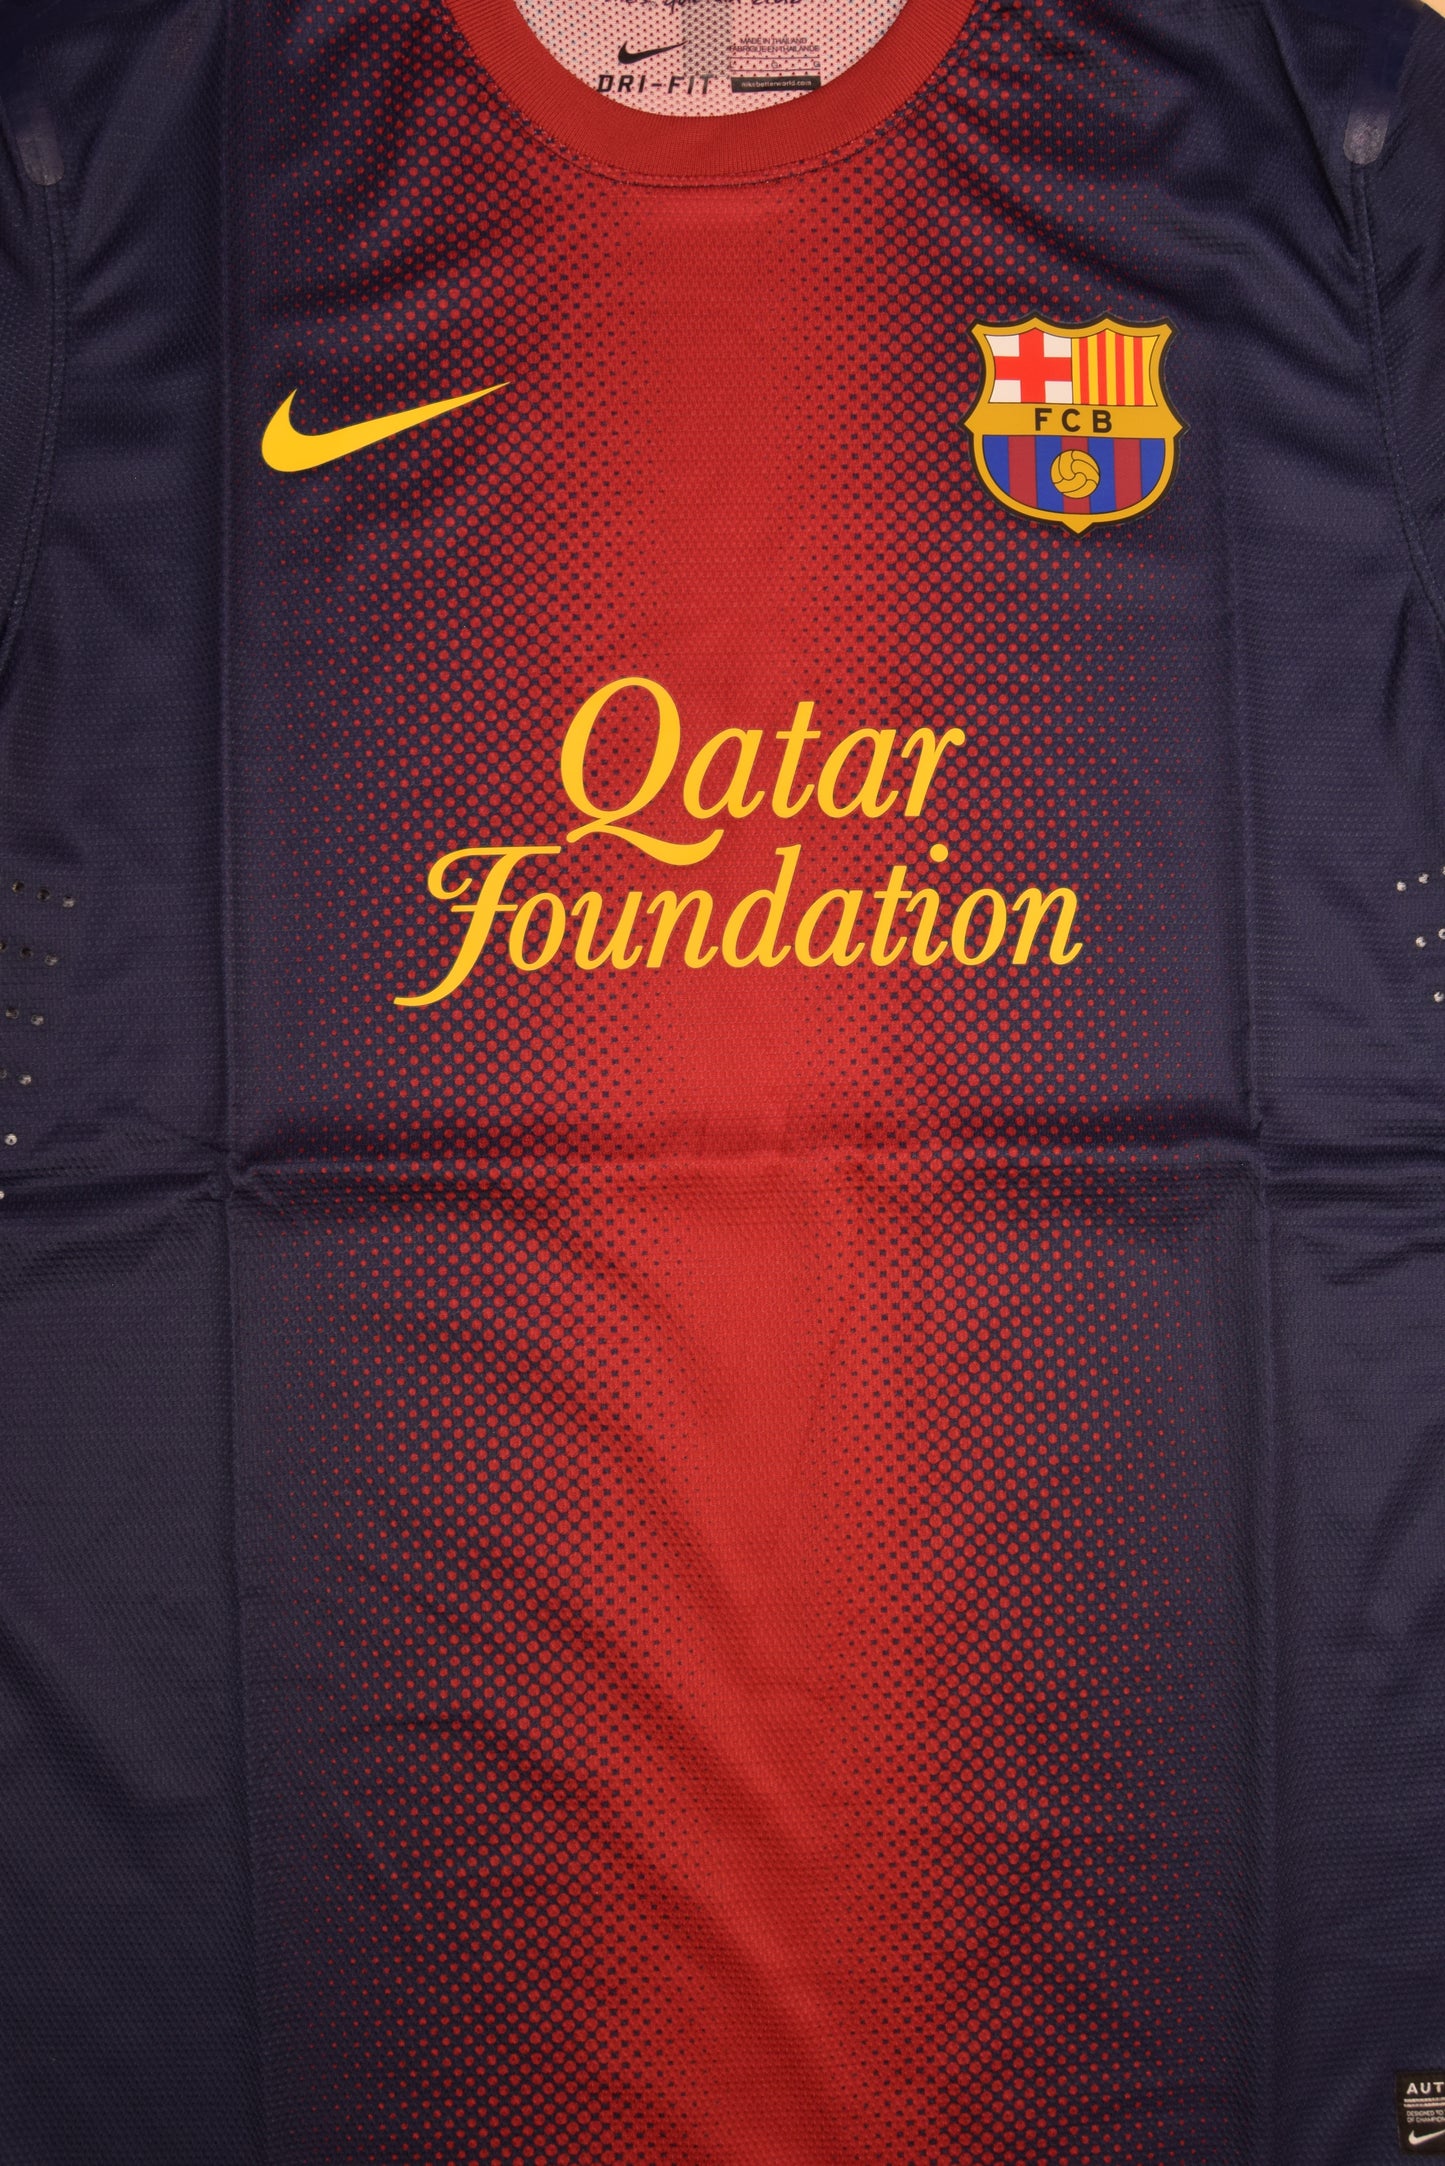 Authentic New FC Barcelona Nike DRI FIT Home Football Shirt 2012 - 2013 Player's Issue / Version Deadstock Size L Red Blue Qatar Foundation